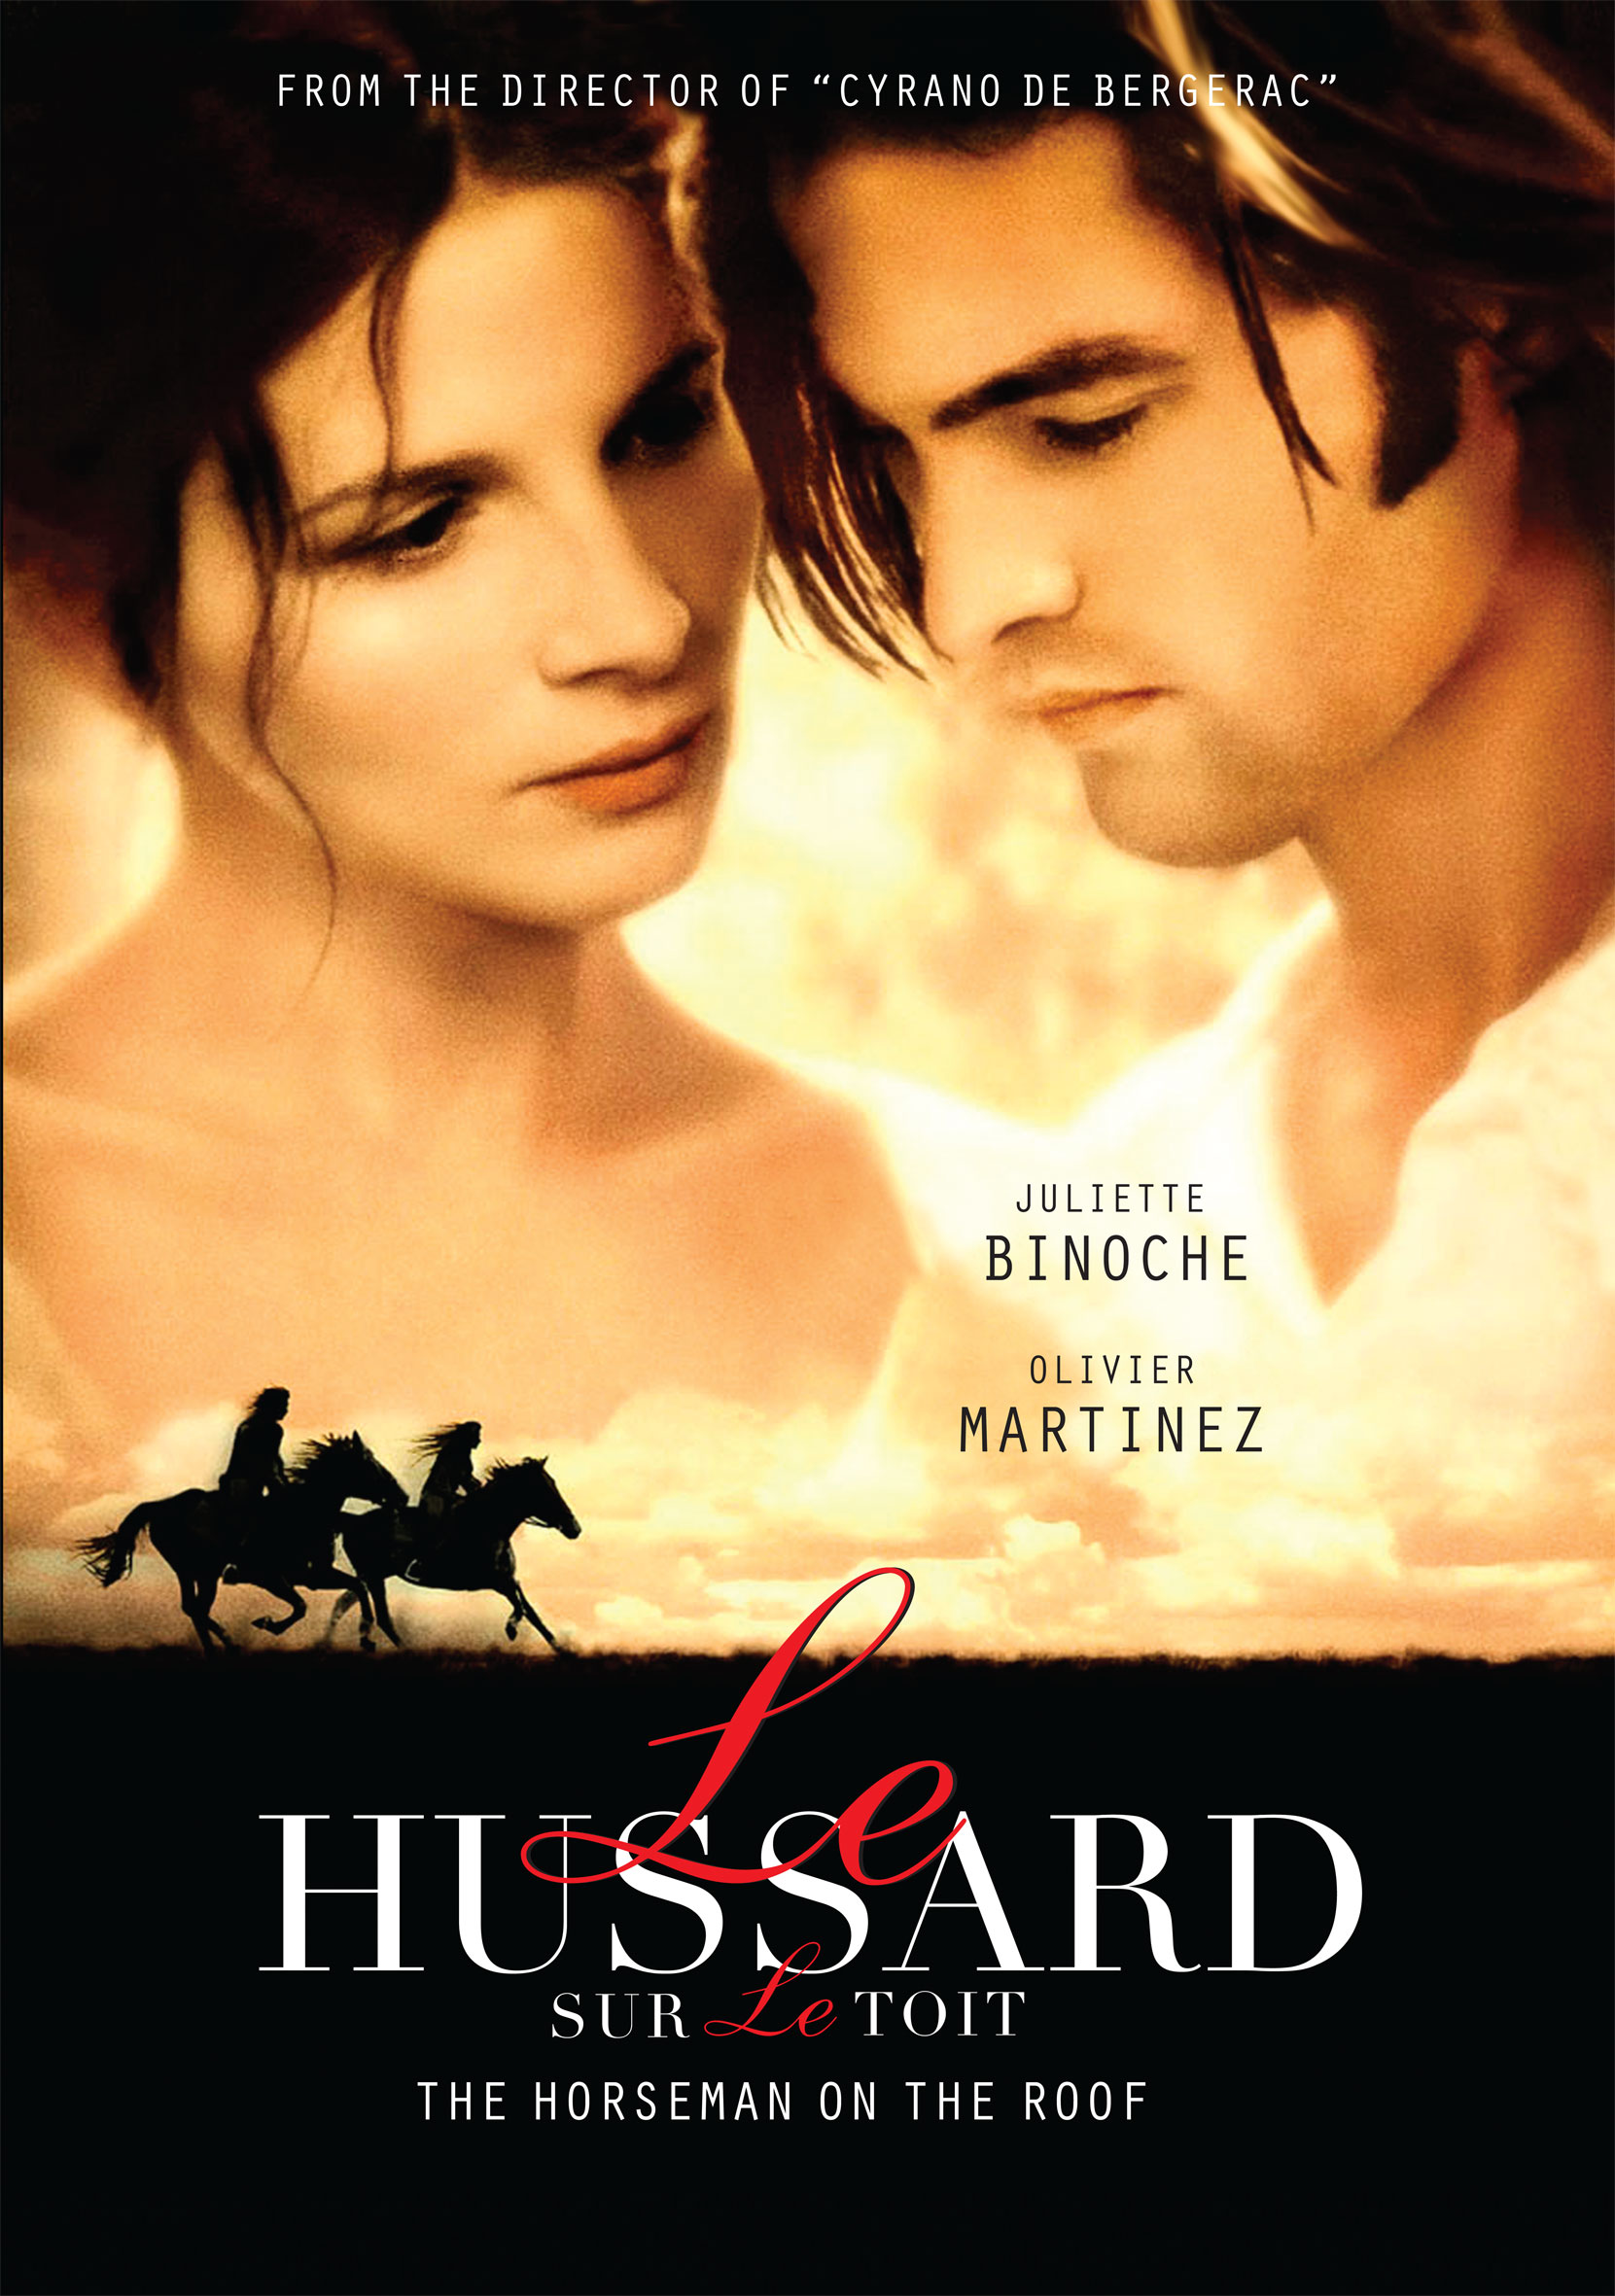 le hussard - poster